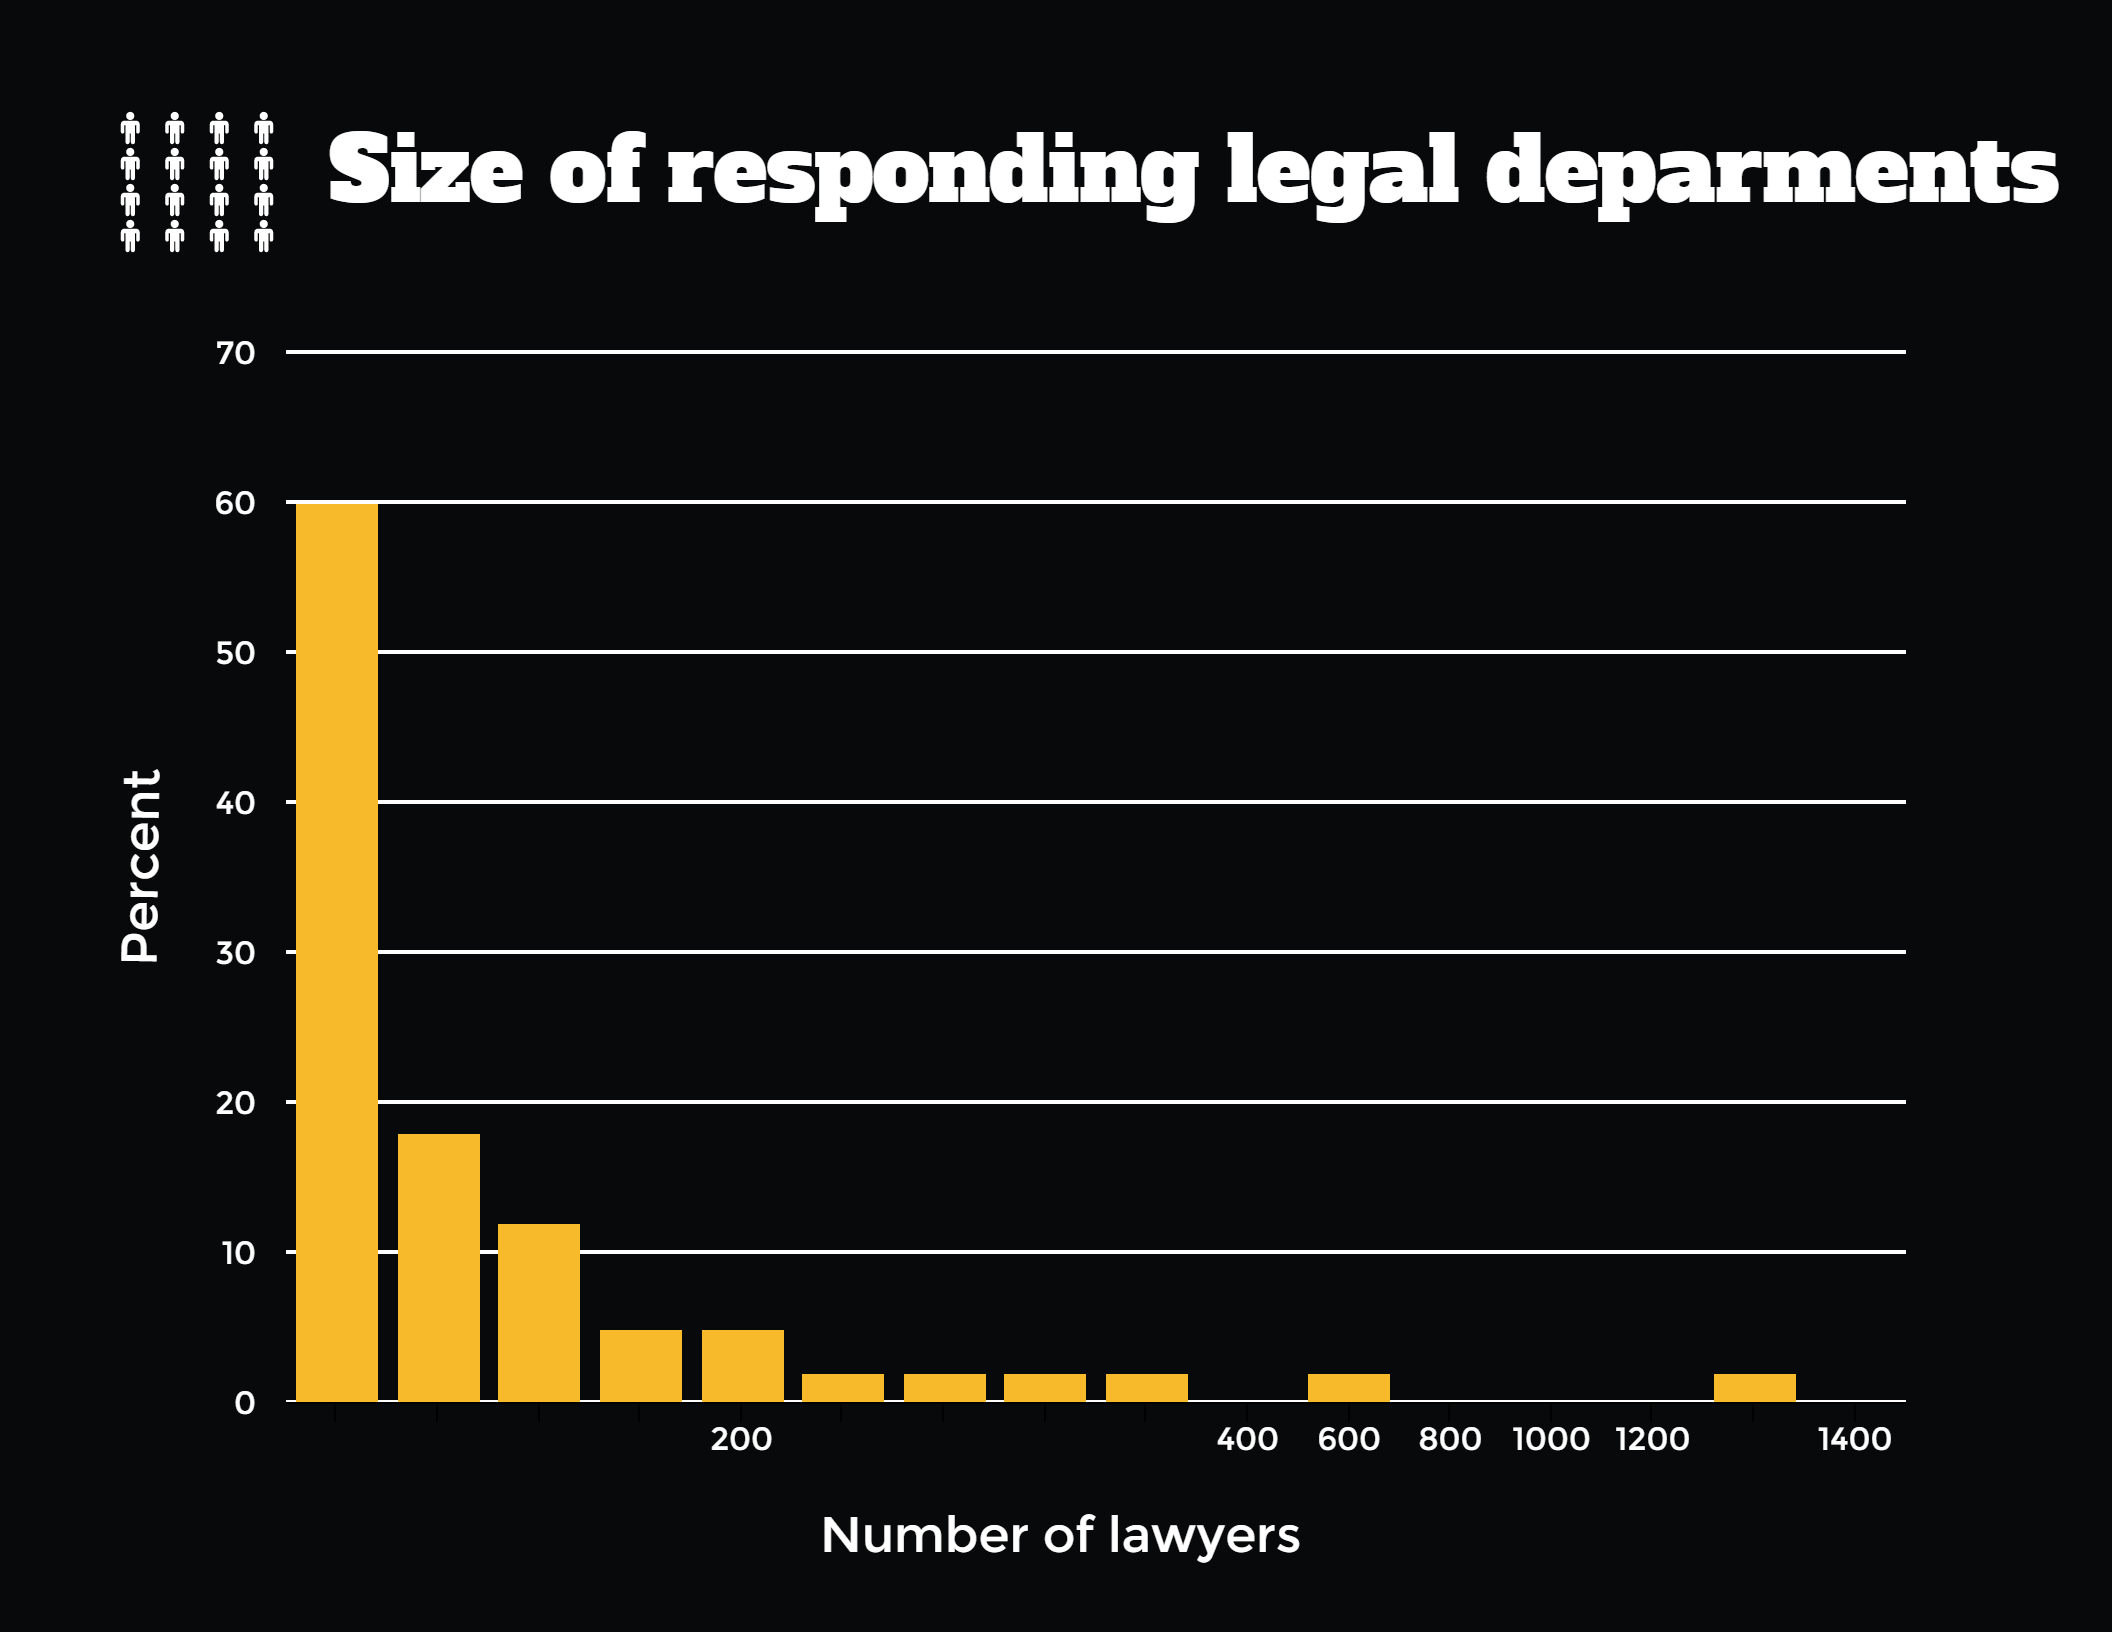 Graph that shows "size of responding legal departments" with percent and numbers of lawyers on alternating axes. The graph reveals that the larger percent, the smaller number of lawyers. 